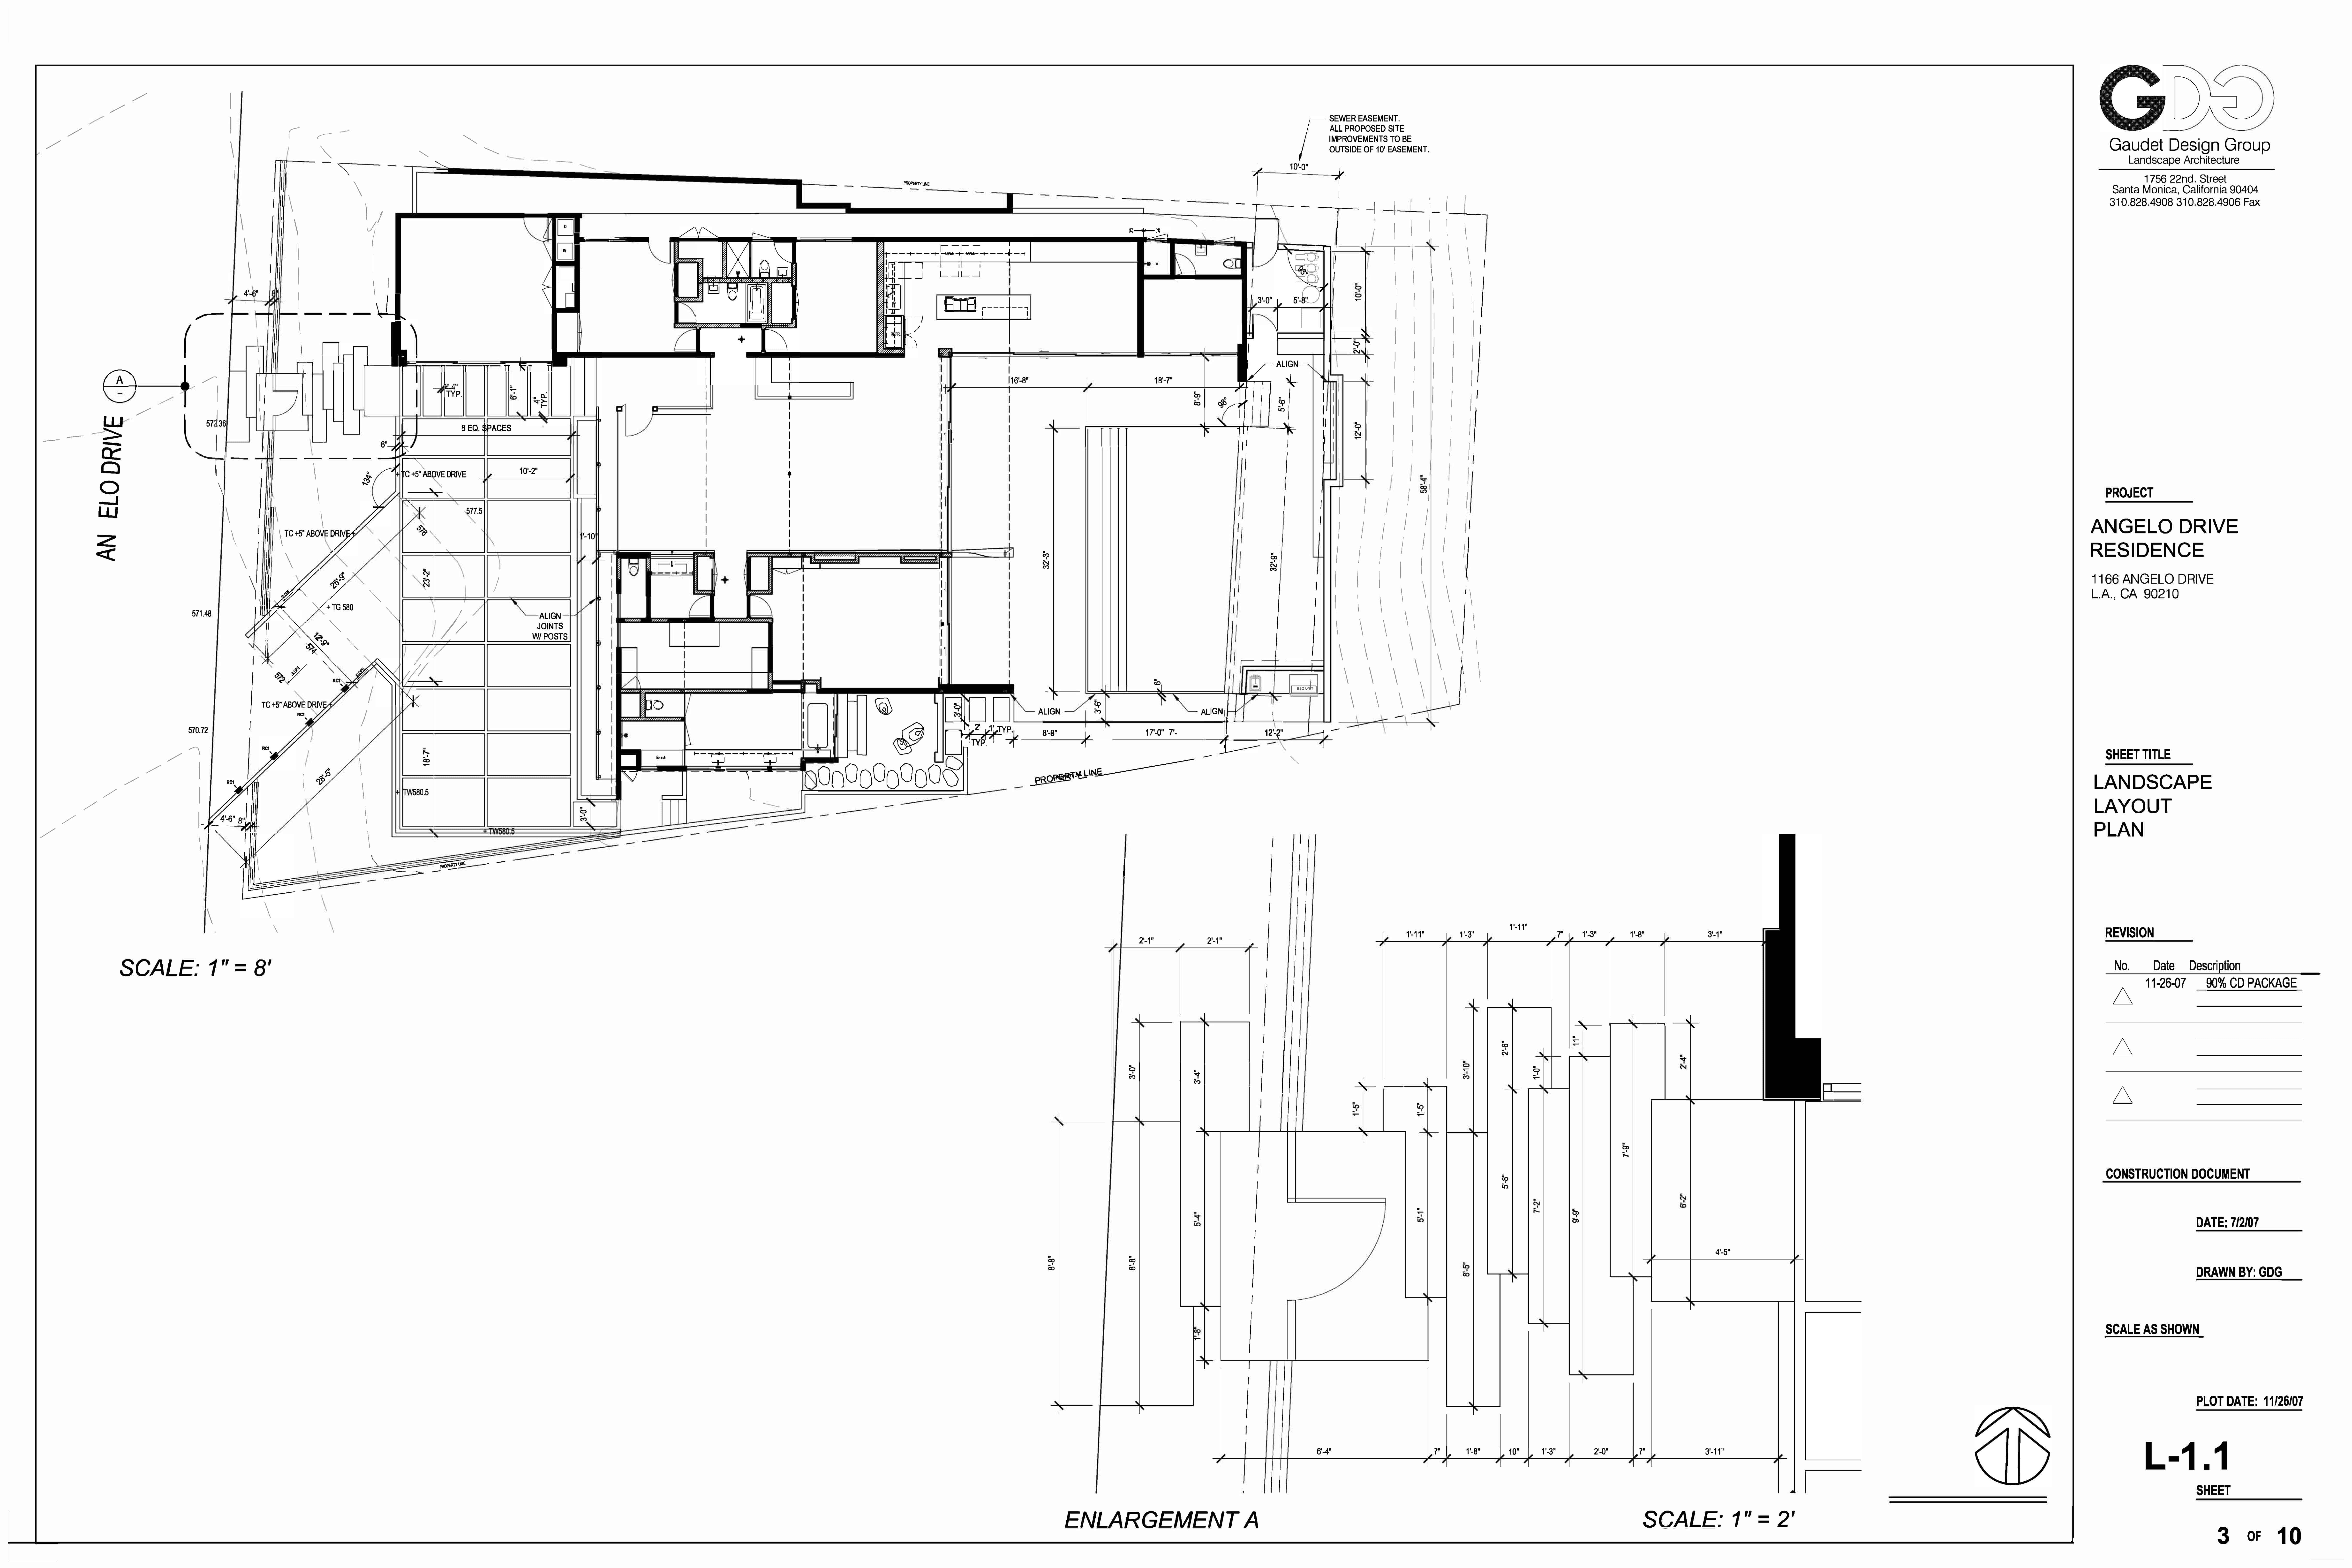 0635_Angelo Residence_L-1.1_Layout Plan